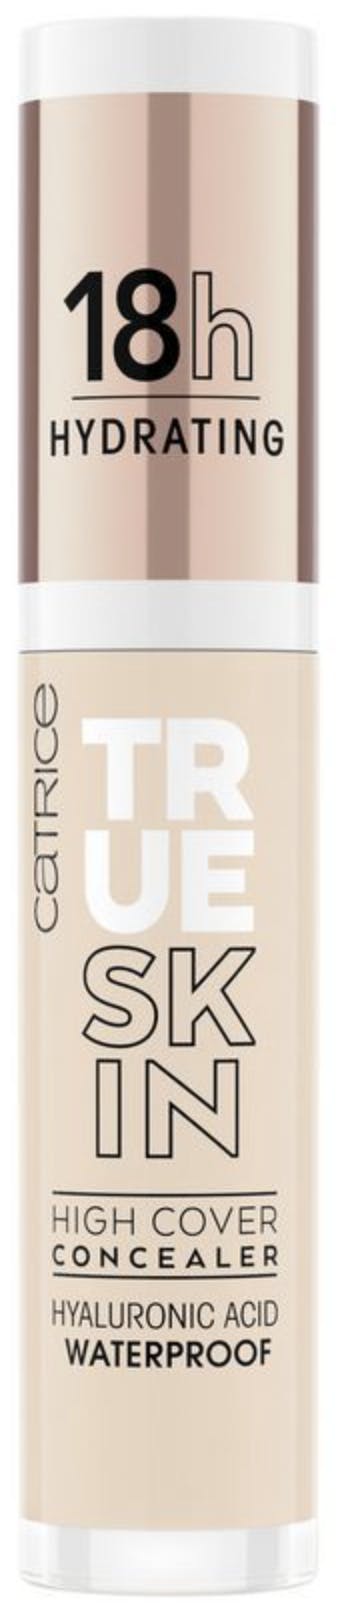 CATRICE True Skin High Cover Concealer